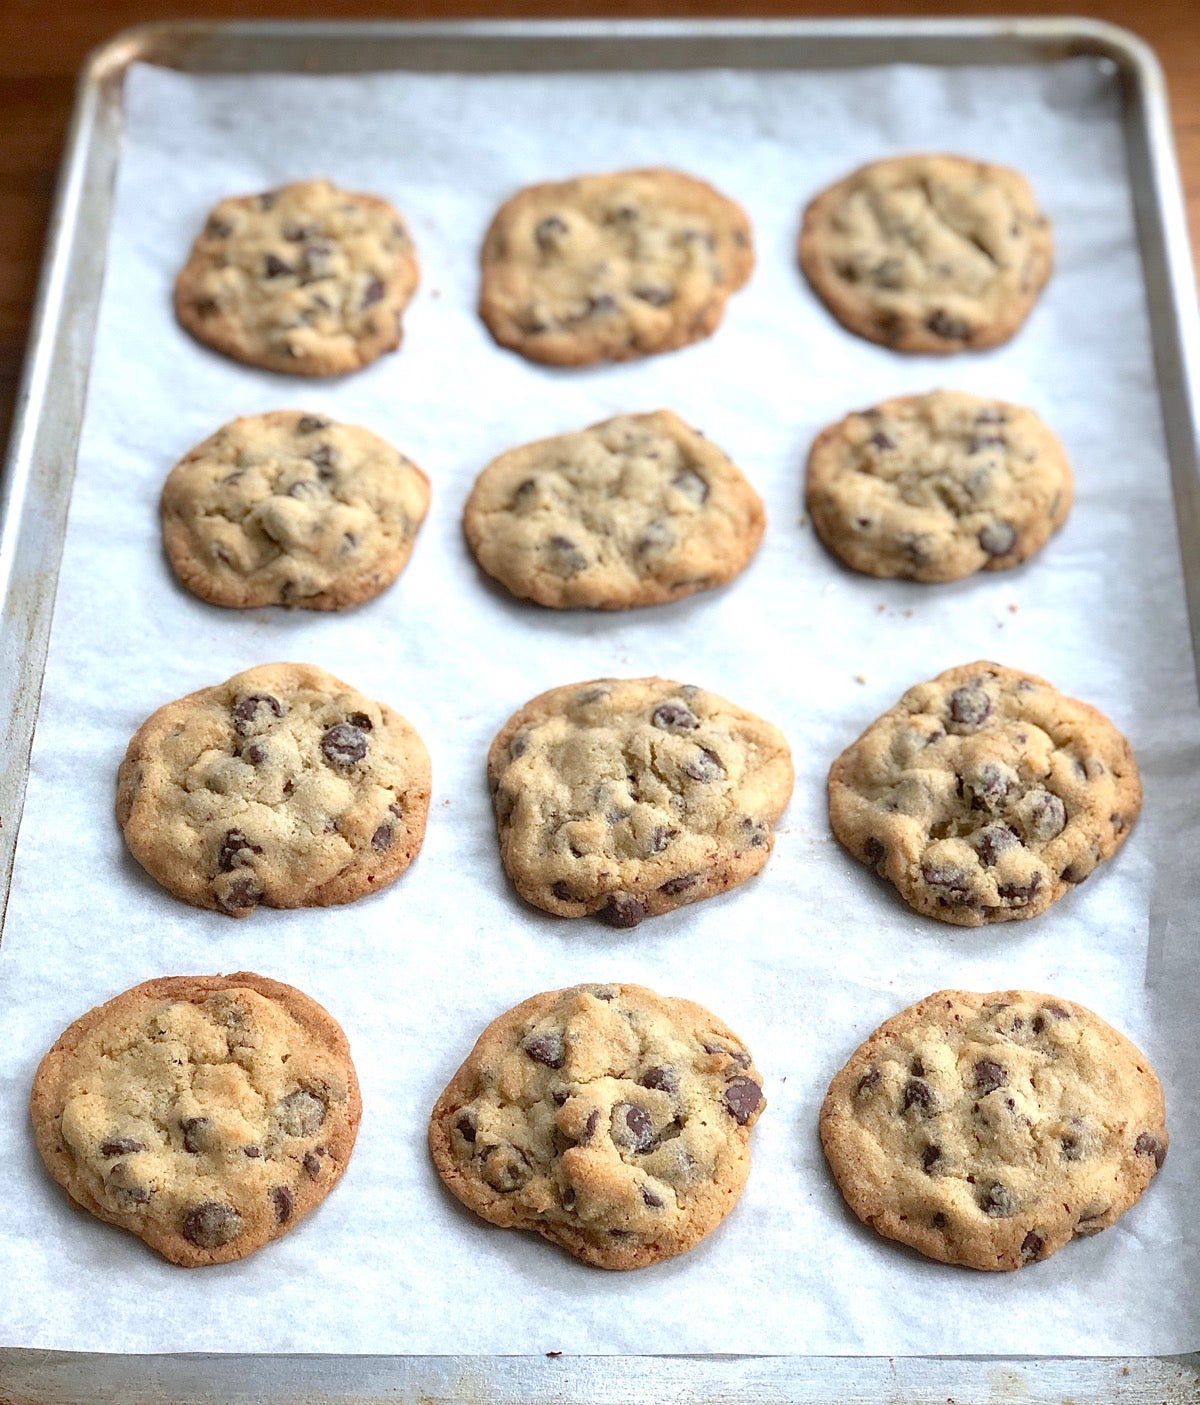 Rows of baked chocolate chip cookies on a parchment-lined baking sheet.